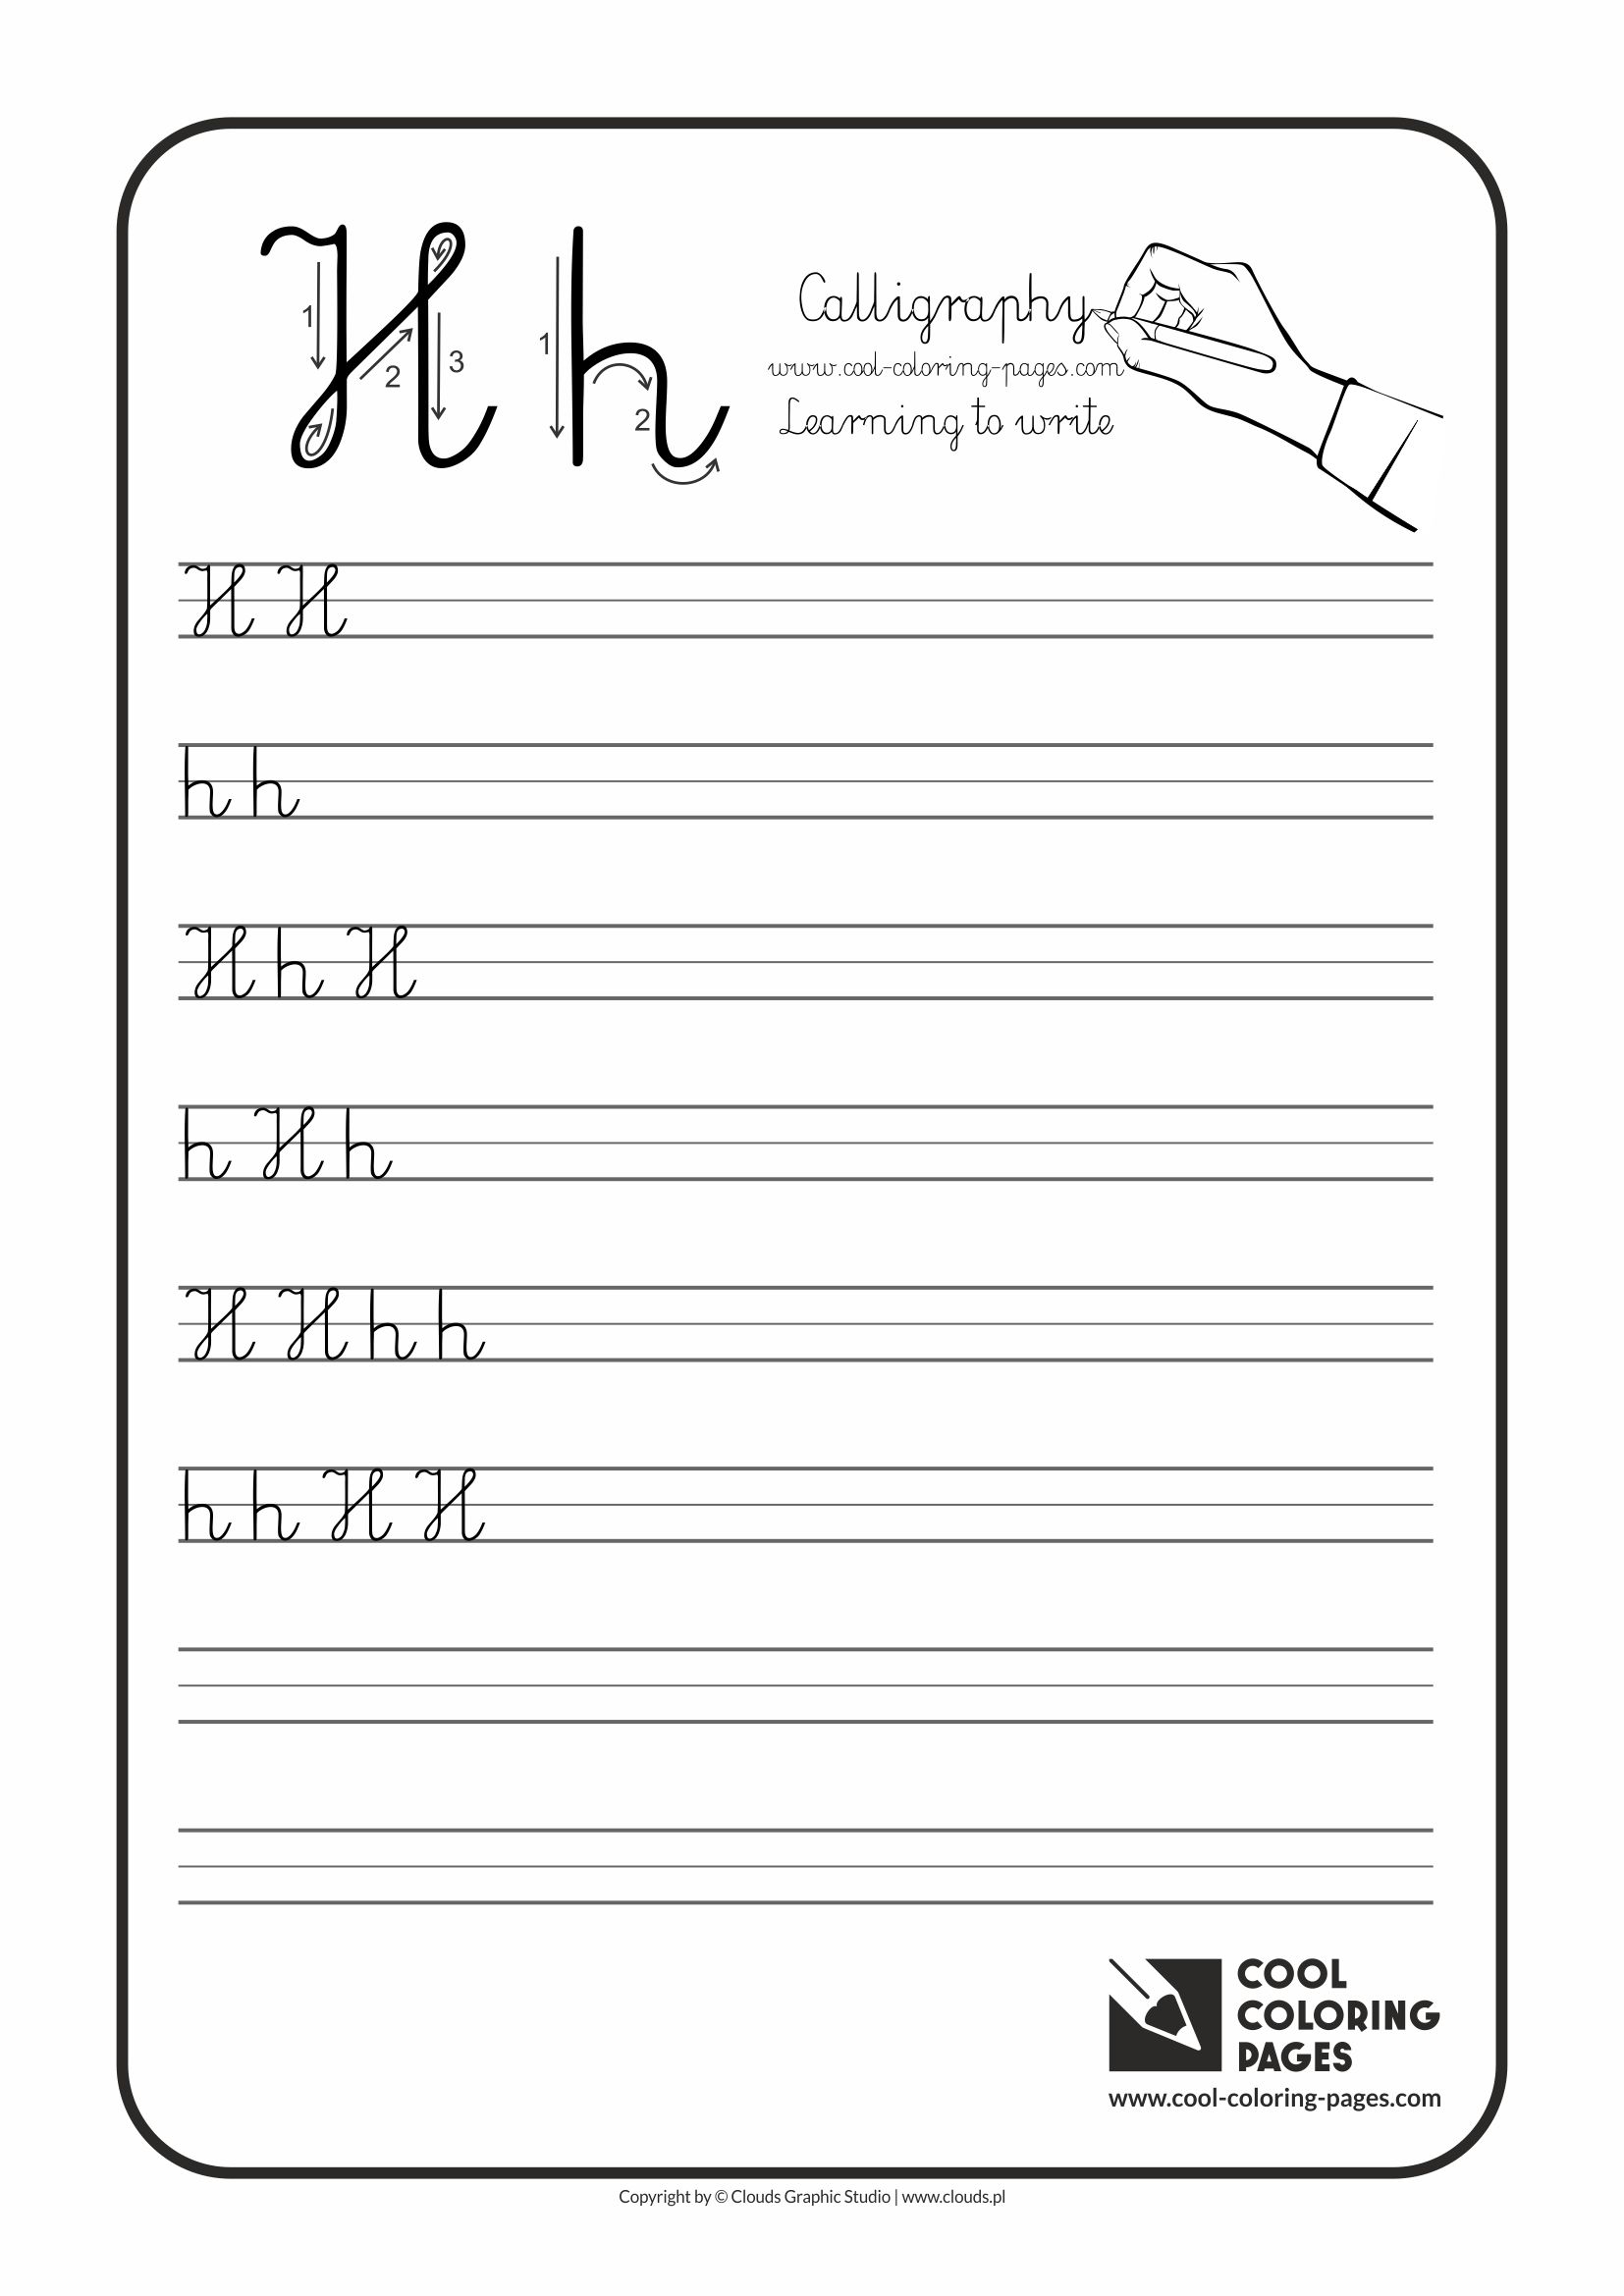 Cool Coloring Pages / Calligraphy / Letter H - Handwriting for kids / Worksheets